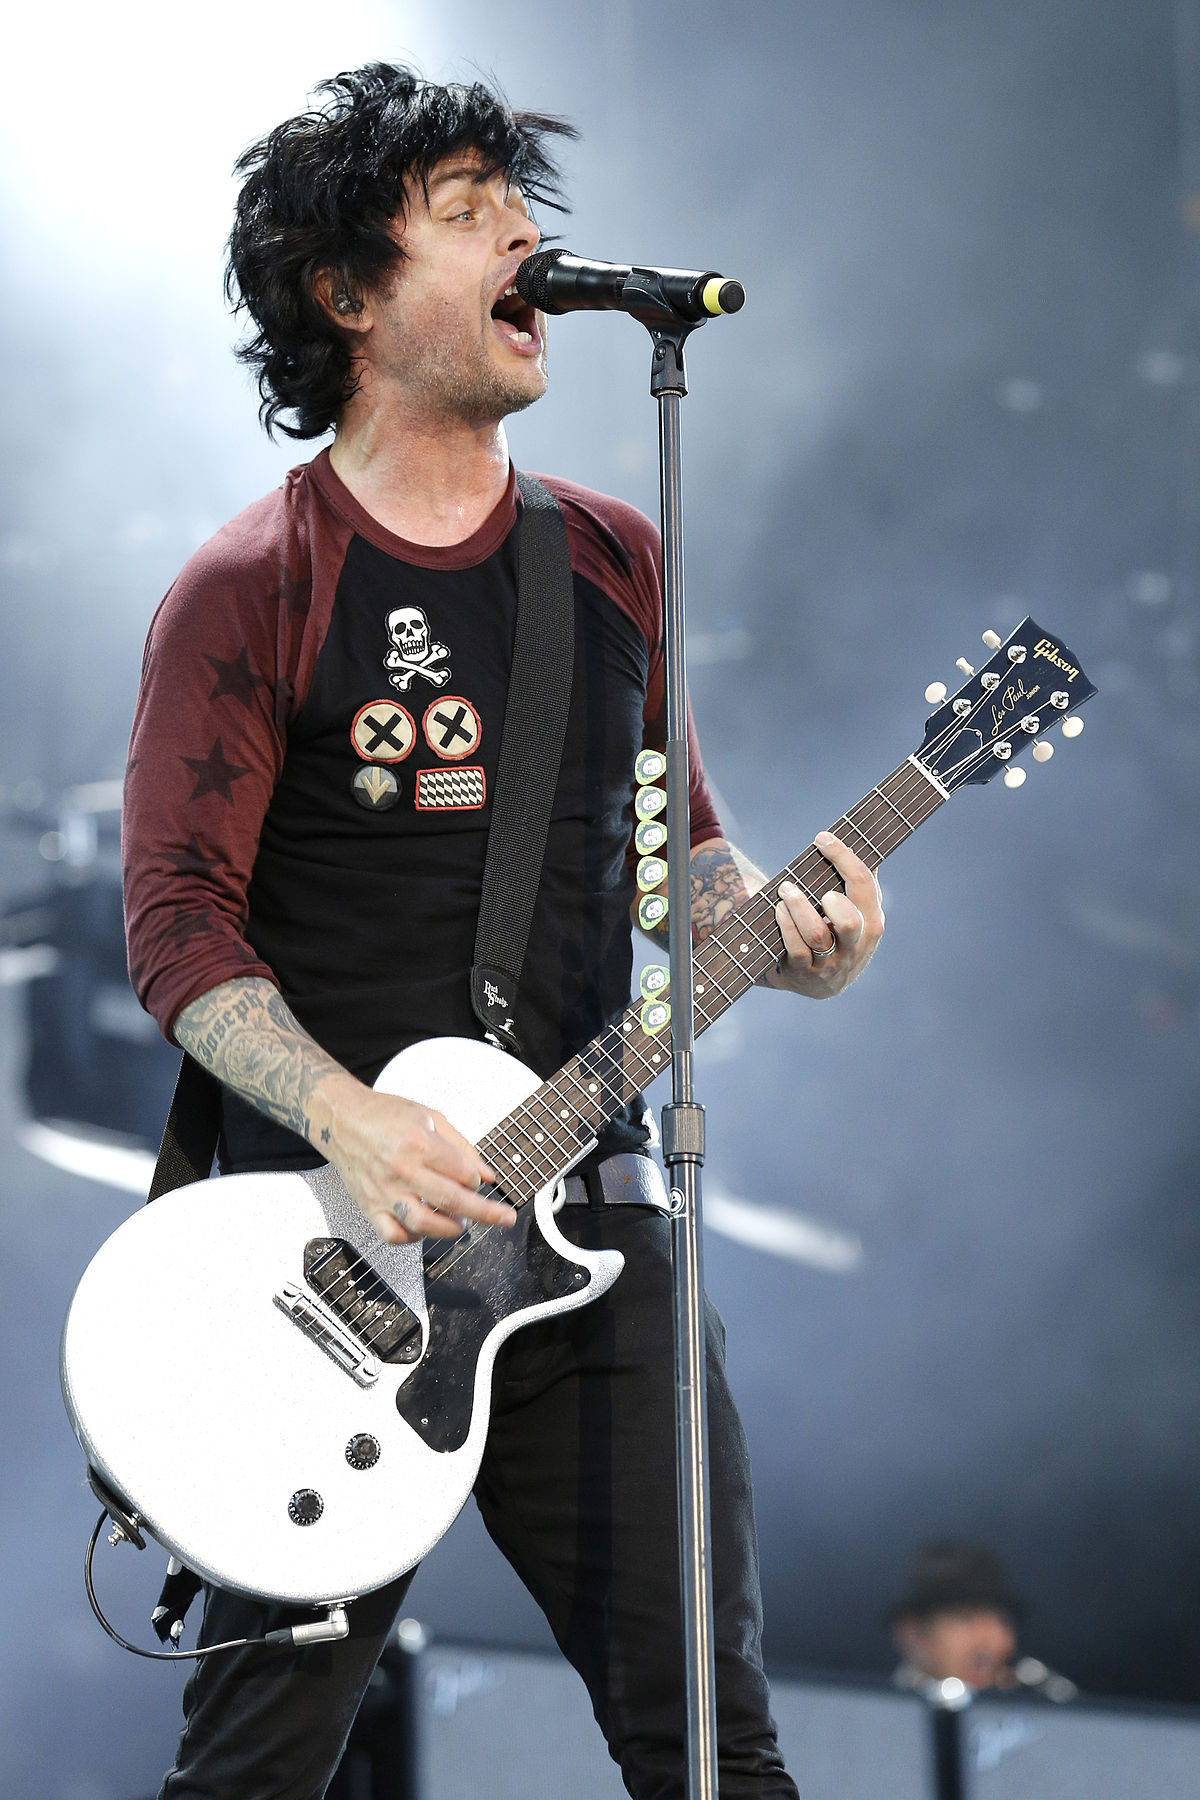 Green Day vocalist Billie Joe Armstrong says he is 'renouncing' American citizenship